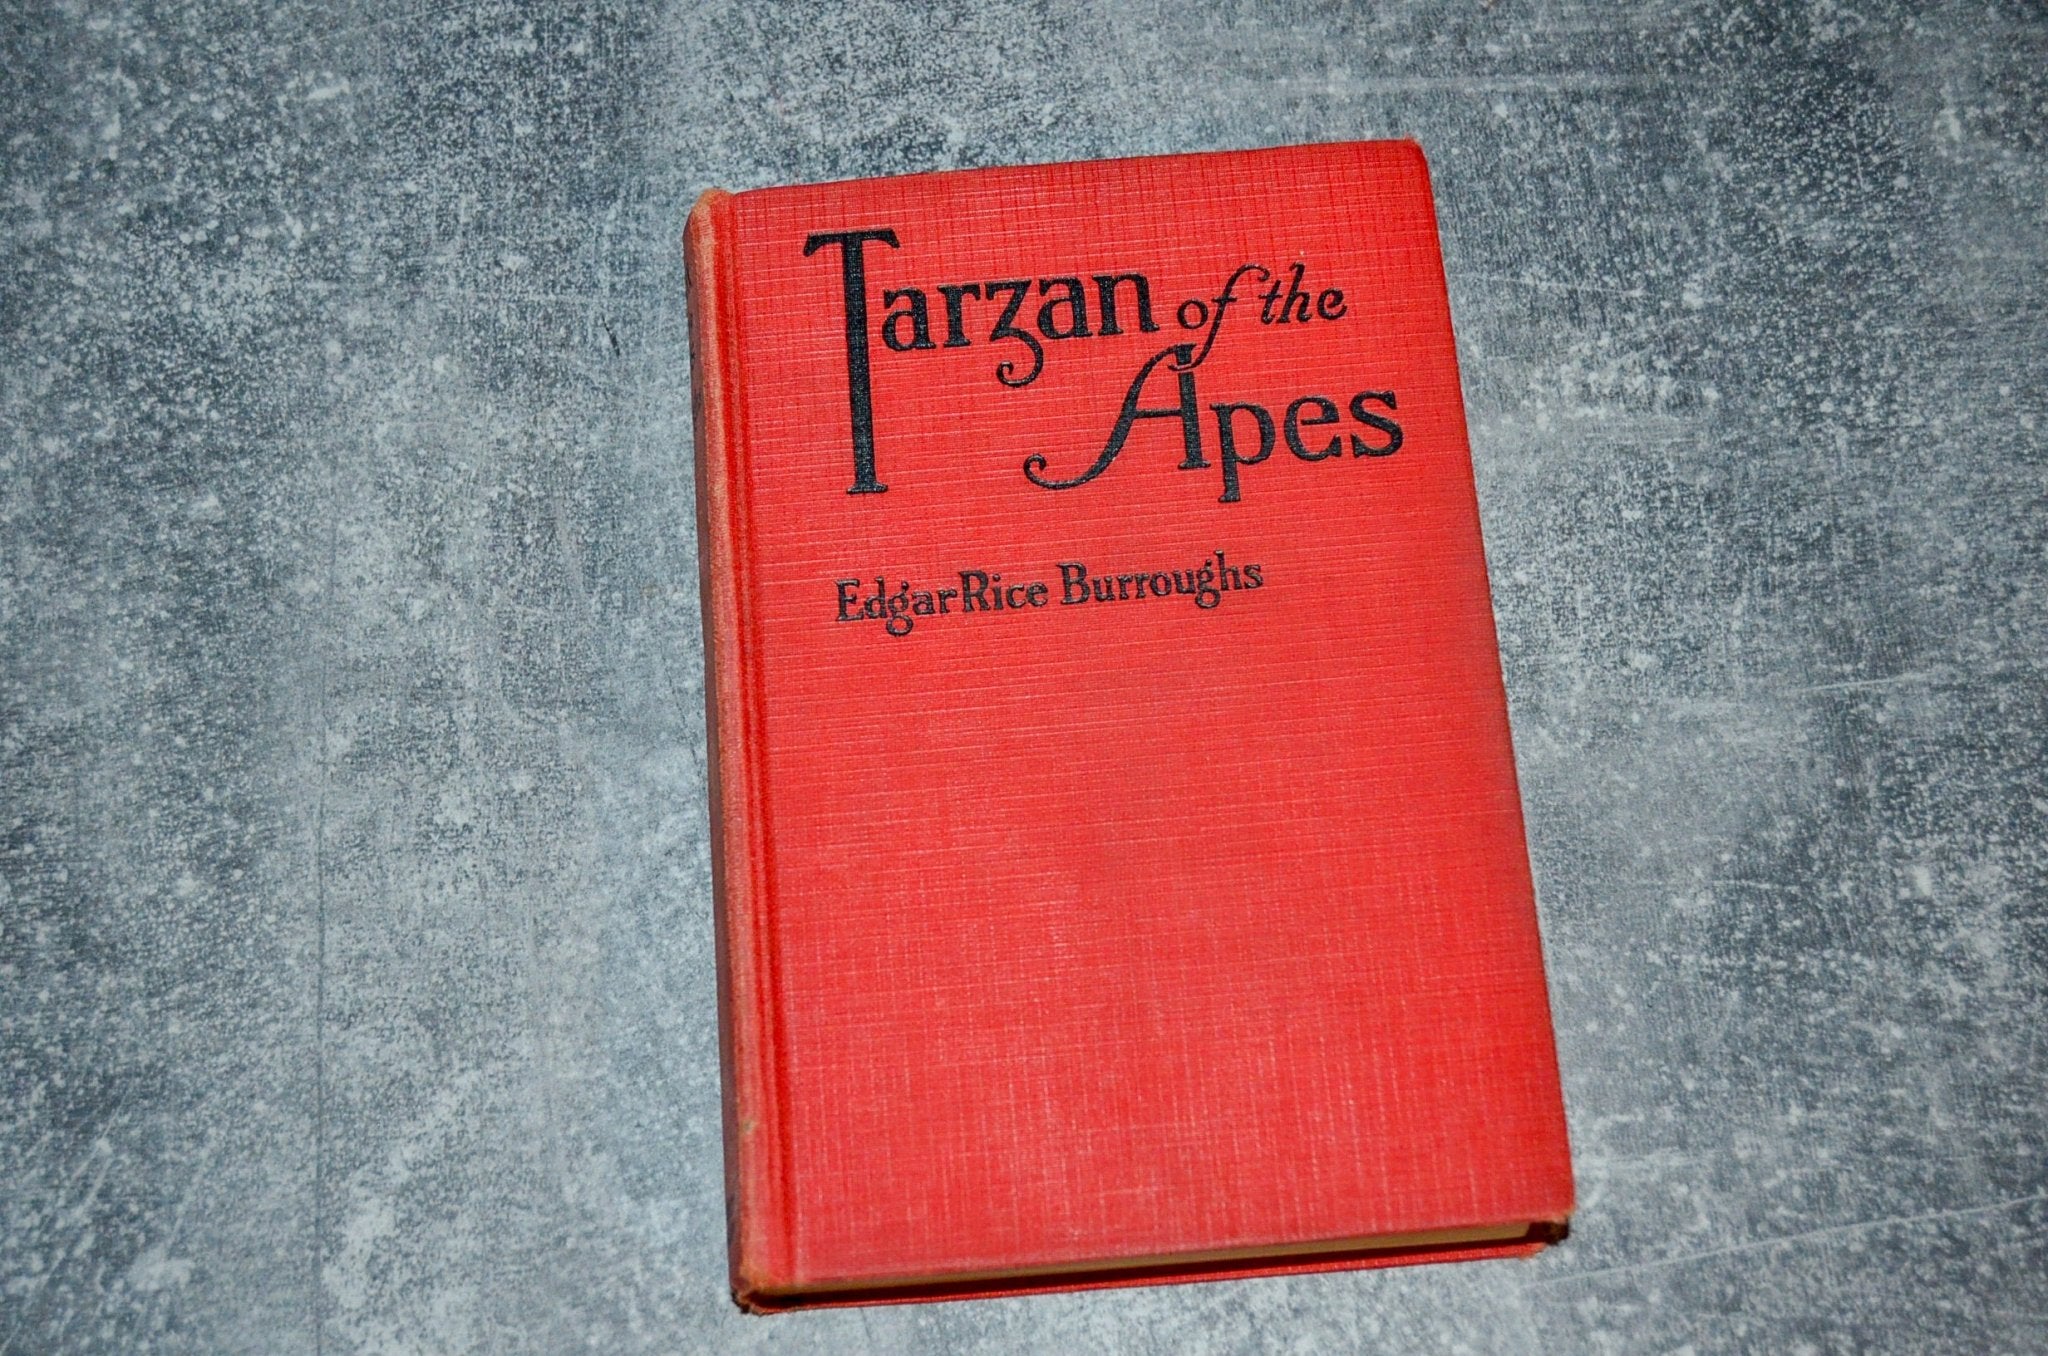 Grosset & Dunlap Edition Tarzan of the Apes by Edgar Rice Burroughs 1914 - Brookfield Books